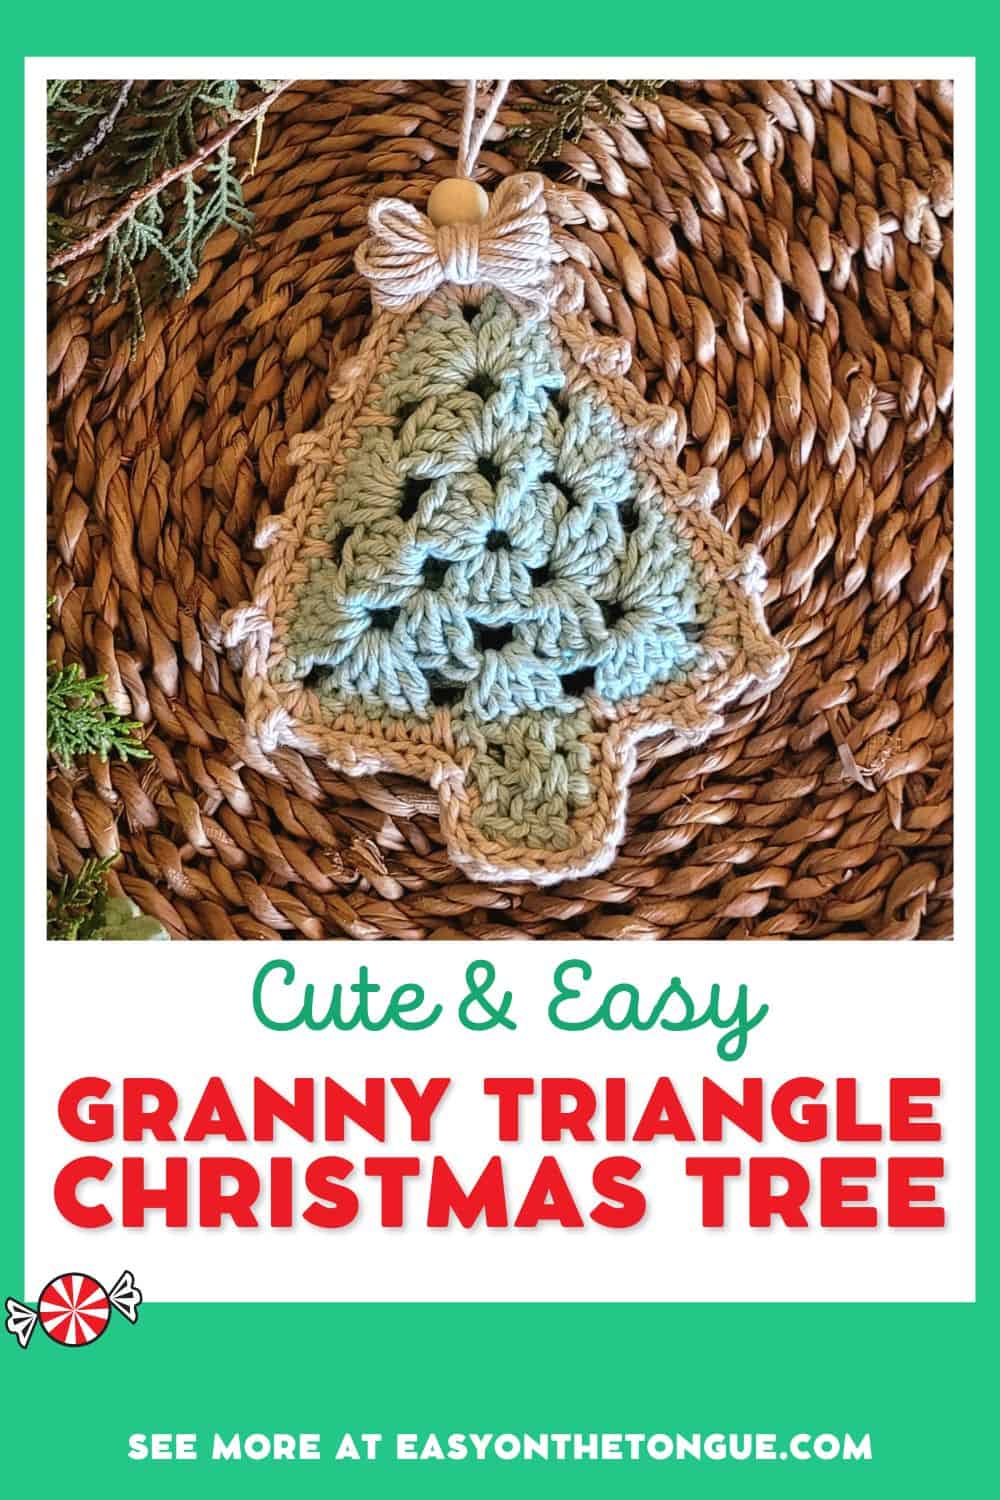 Triangle granny Christmas tree ornament by easyonthetongue.com  Quick crochet pattern for a triangle granny Christmas tree ornament